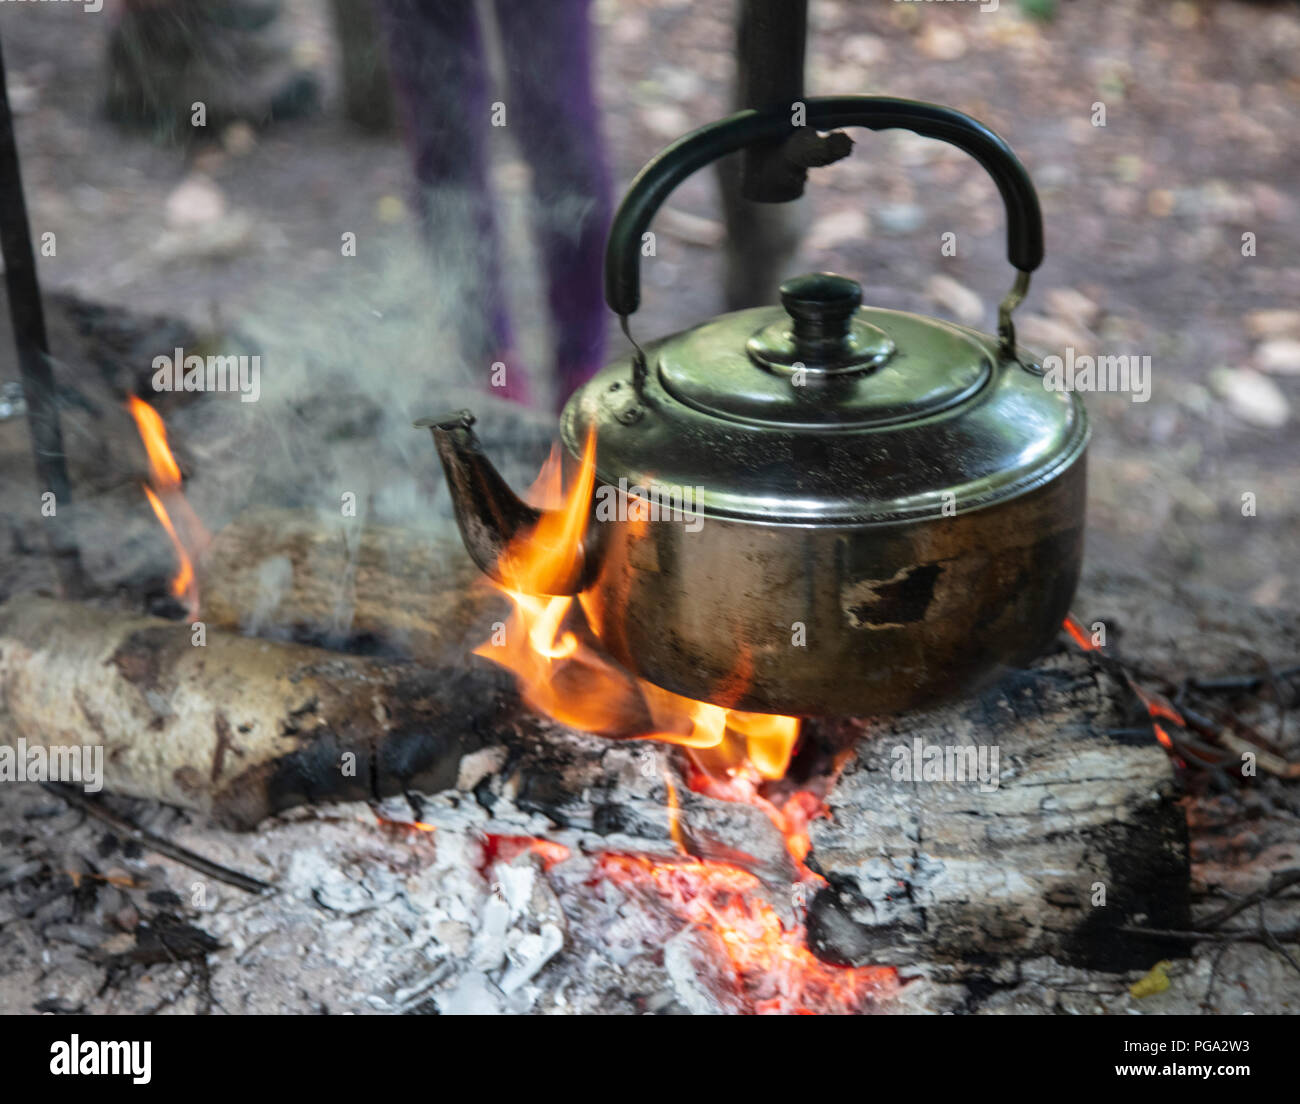 https://c8.alamy.com/comp/PGA2W3/campfire-kettle-over-a-log-fire-for-hot-water-cooking-and-hot-drinks-PGA2W3.jpg